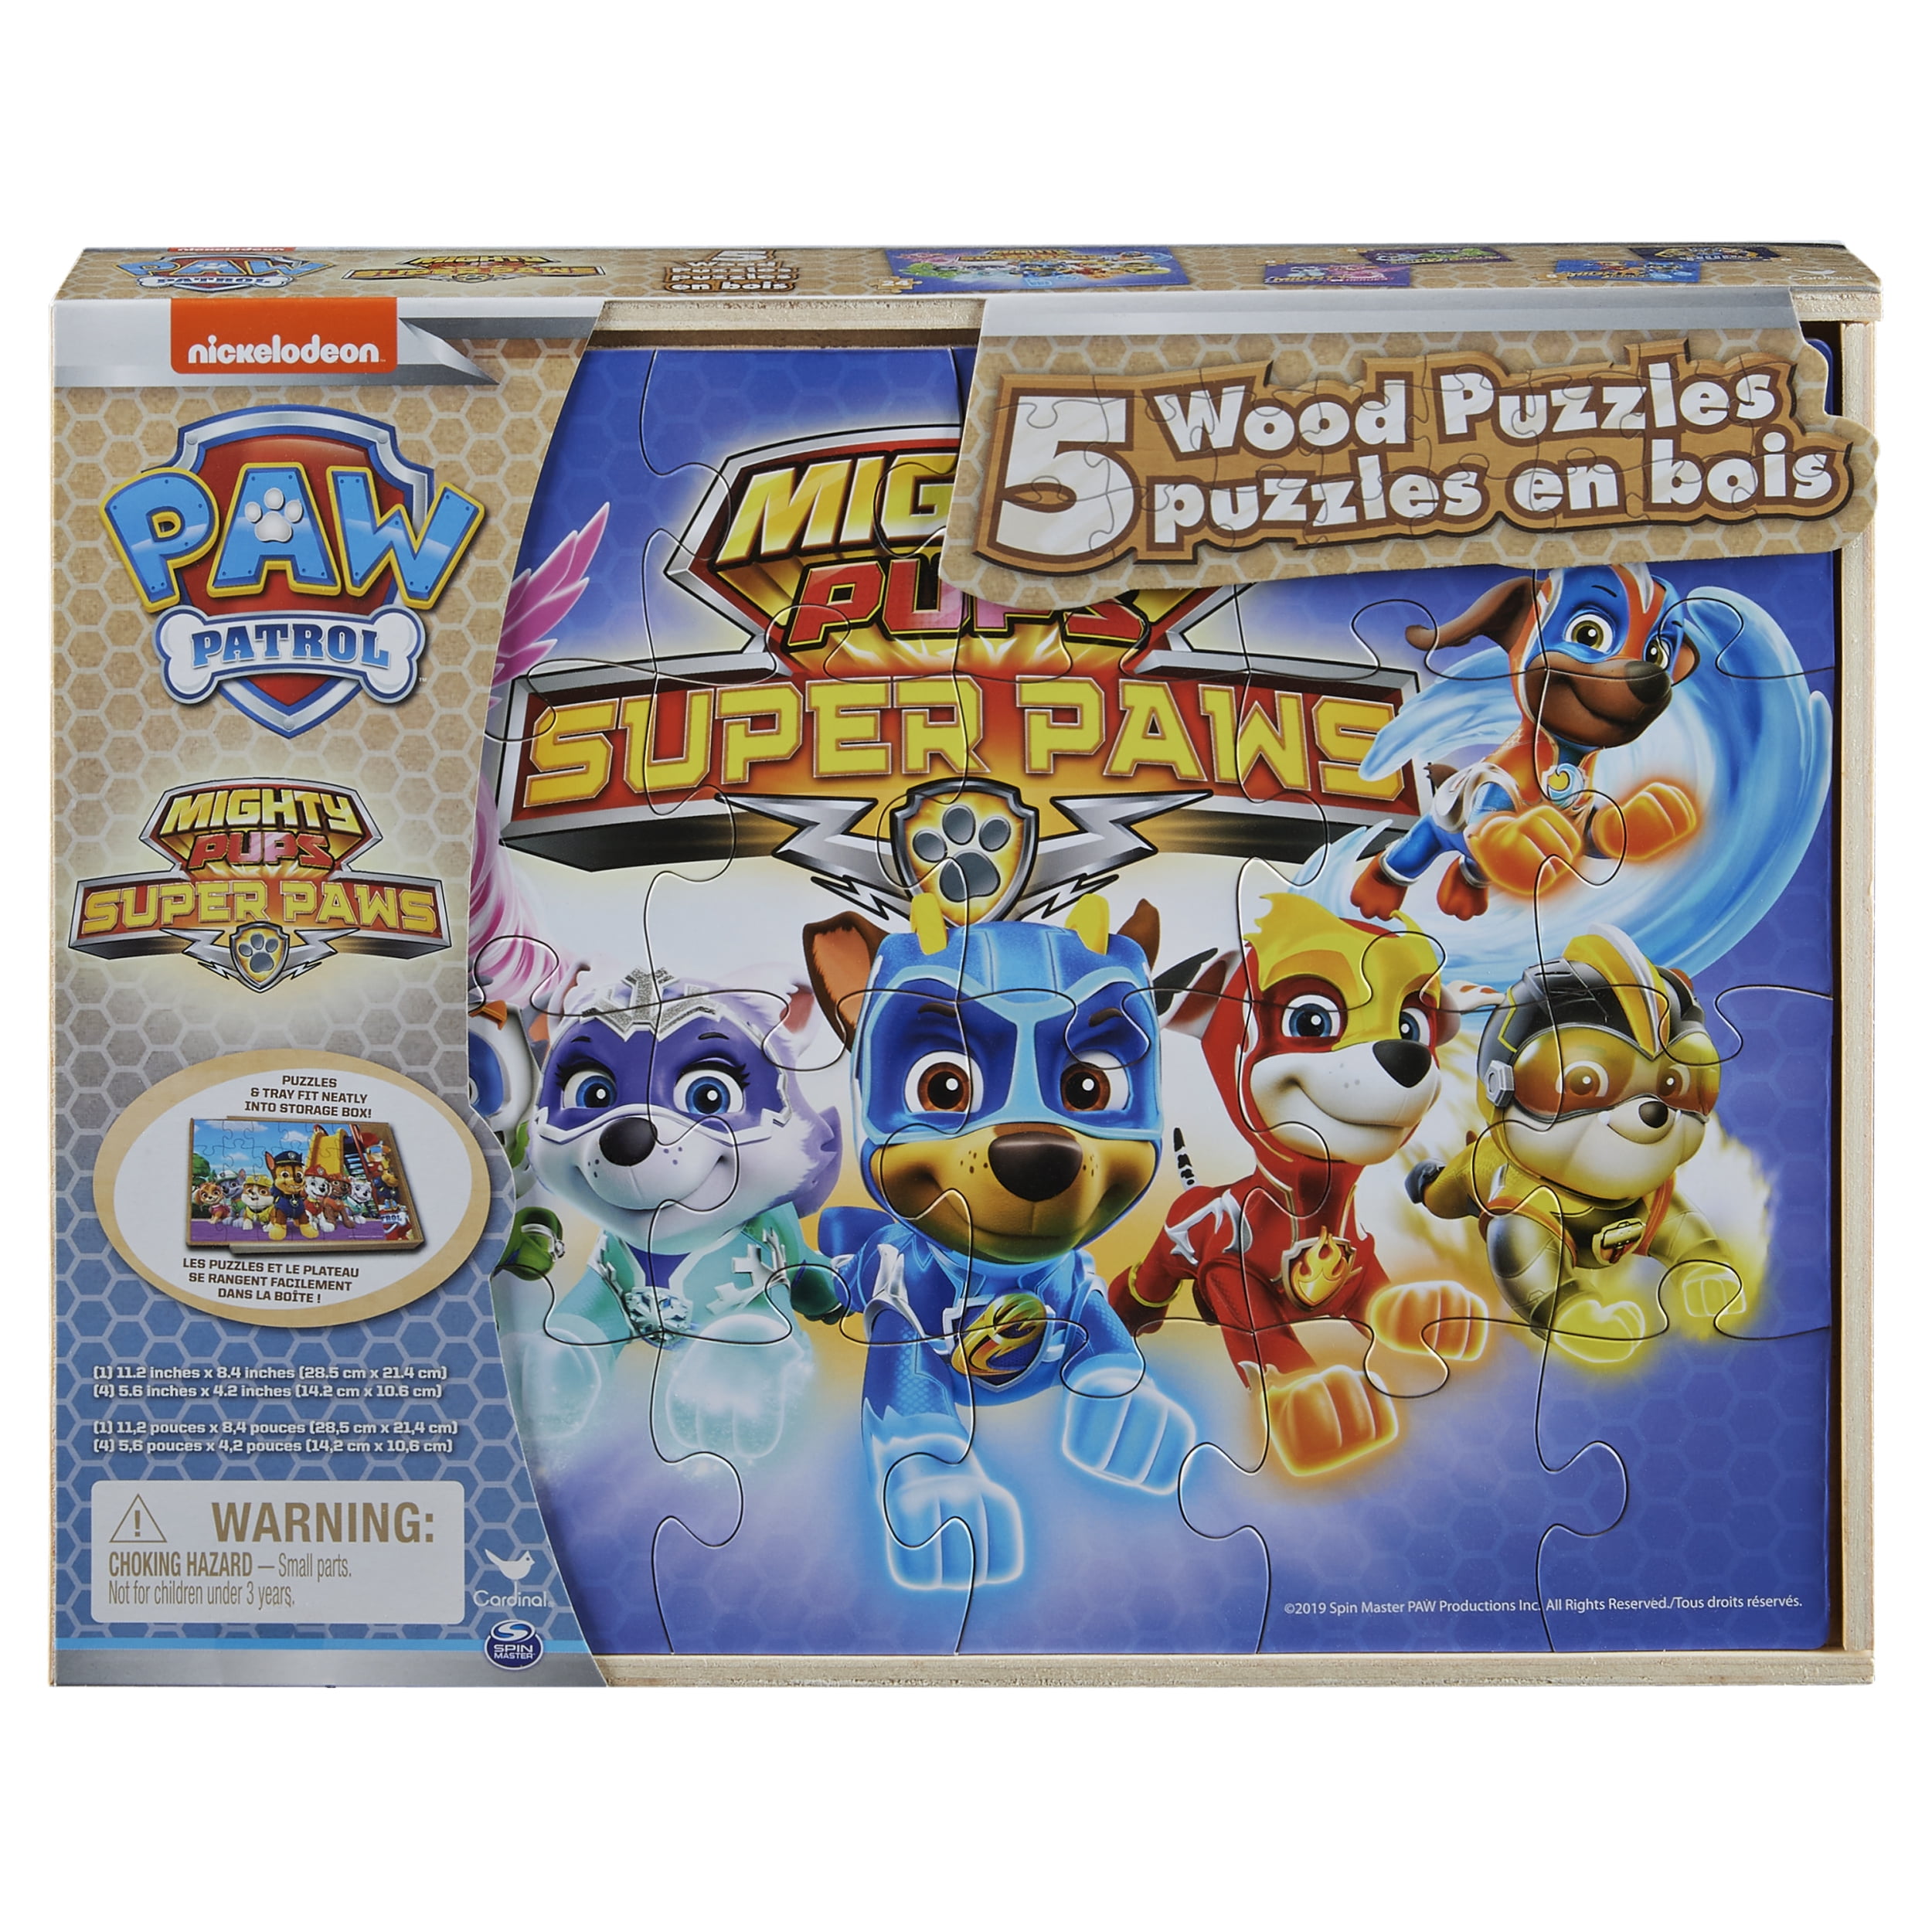 Marshal PAW PATROL 24 Piece Puzzle MIGHTY PUPS SUPER PAWS Spin Master nick jr 